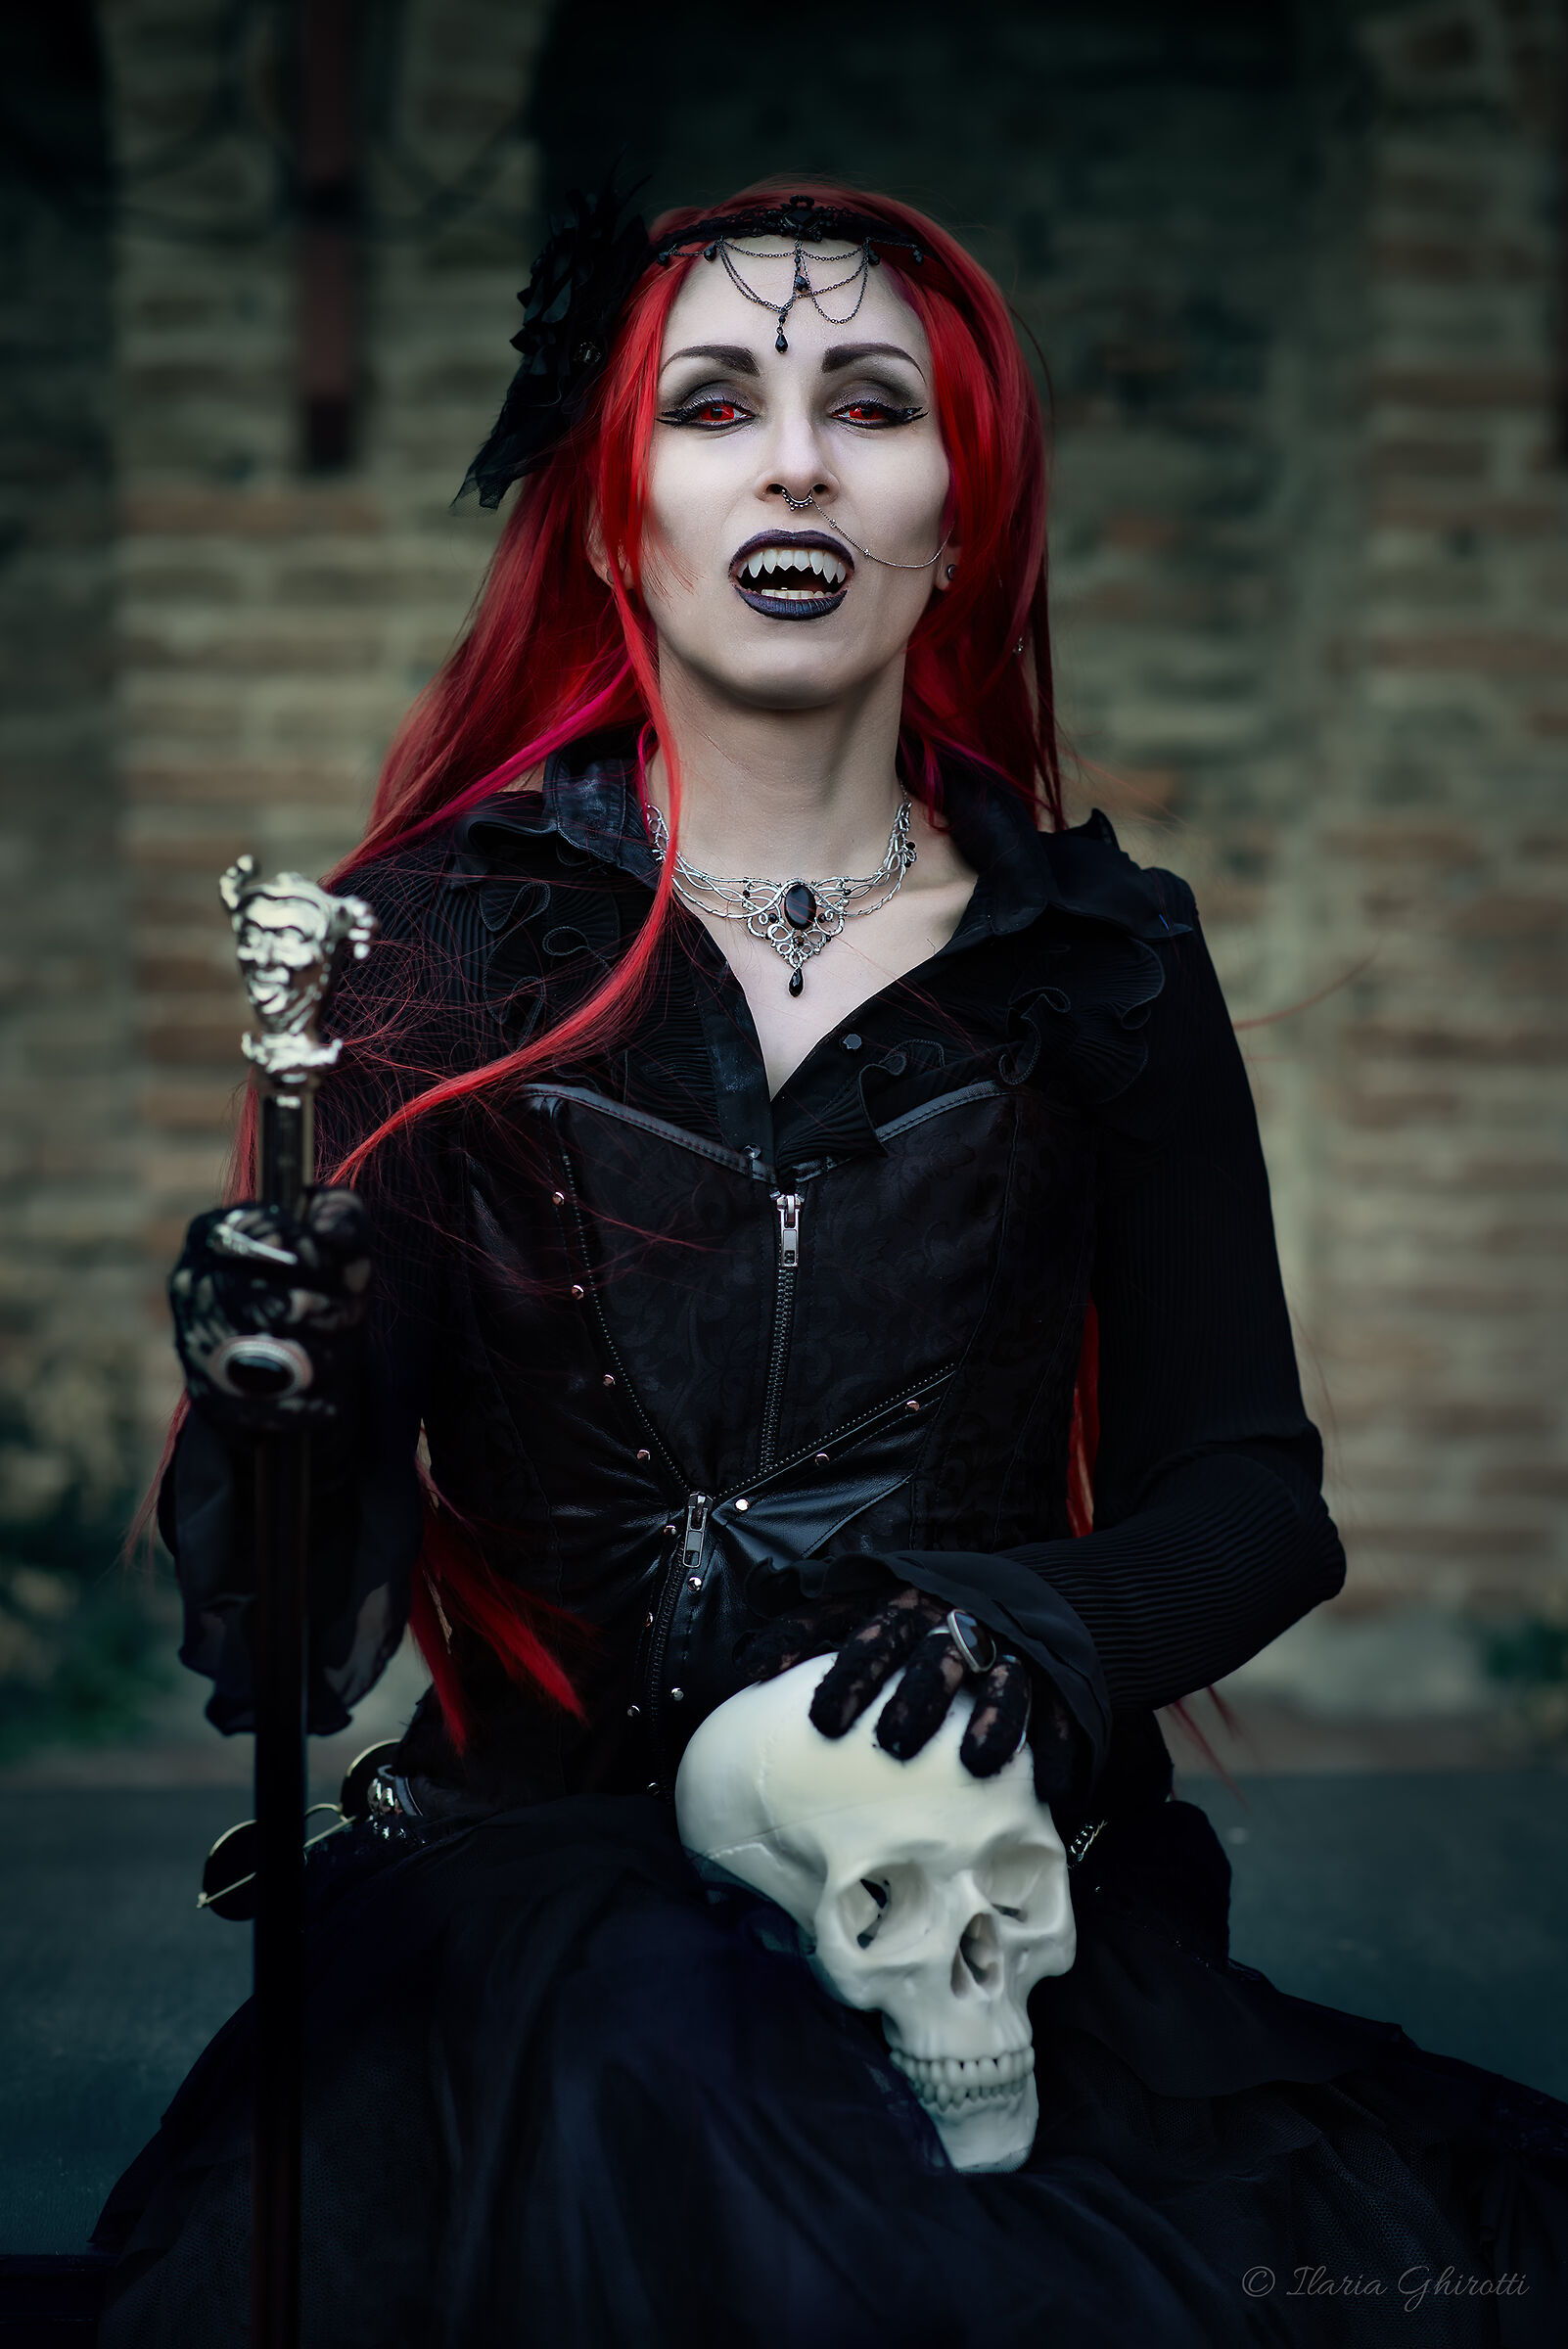 The red-haired vampire...